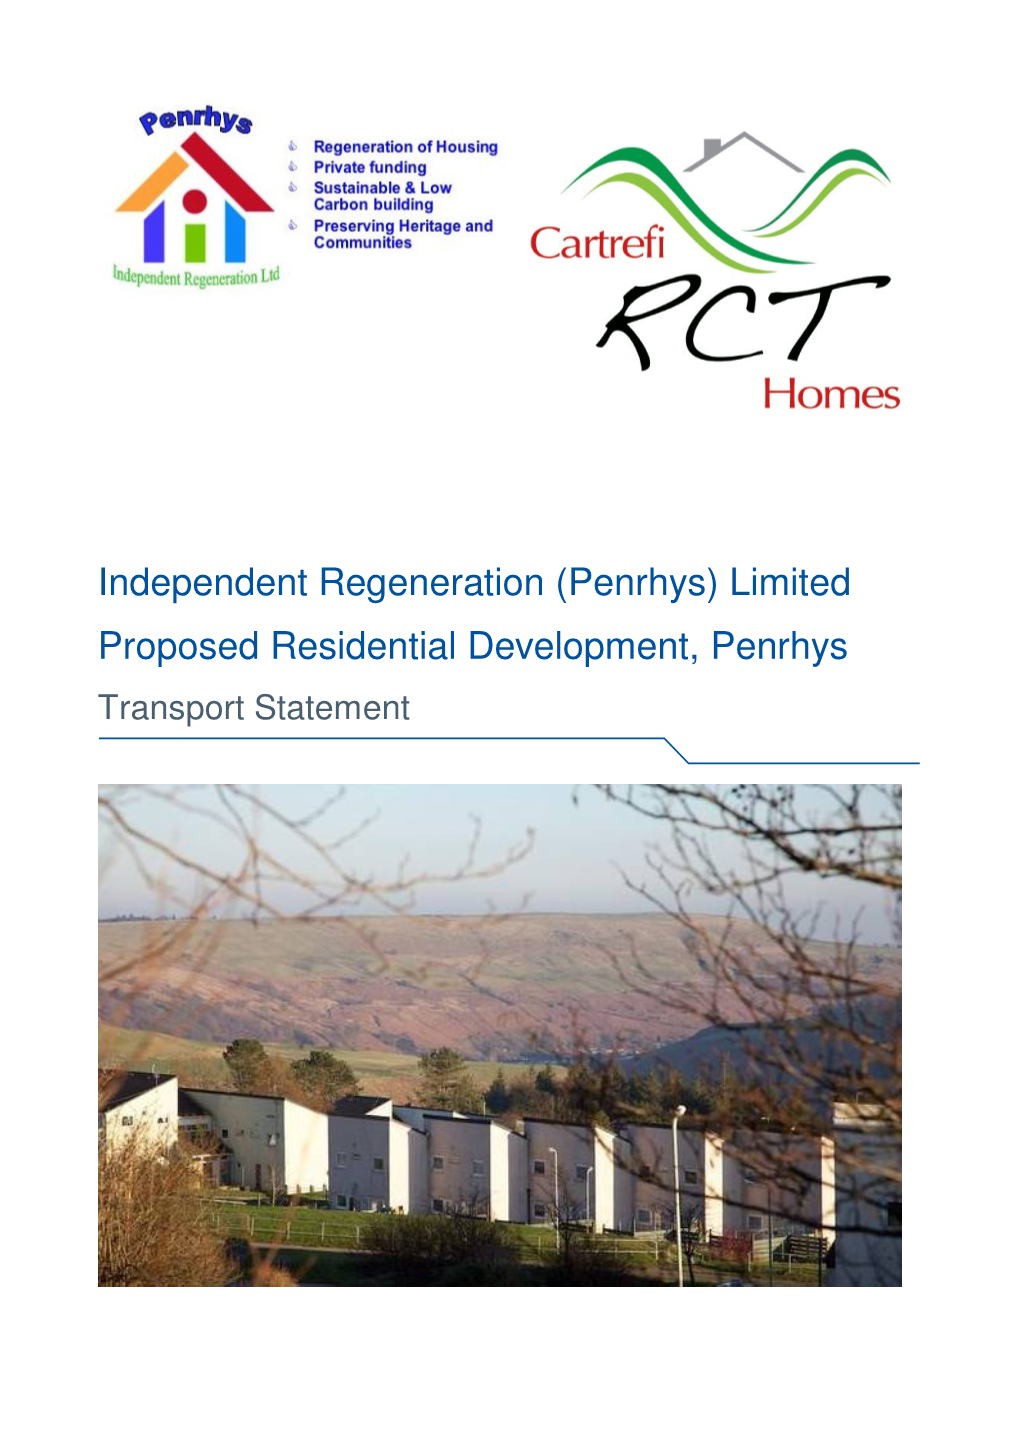 Limited Proposed Residential Development, Penrhys Transport Statement